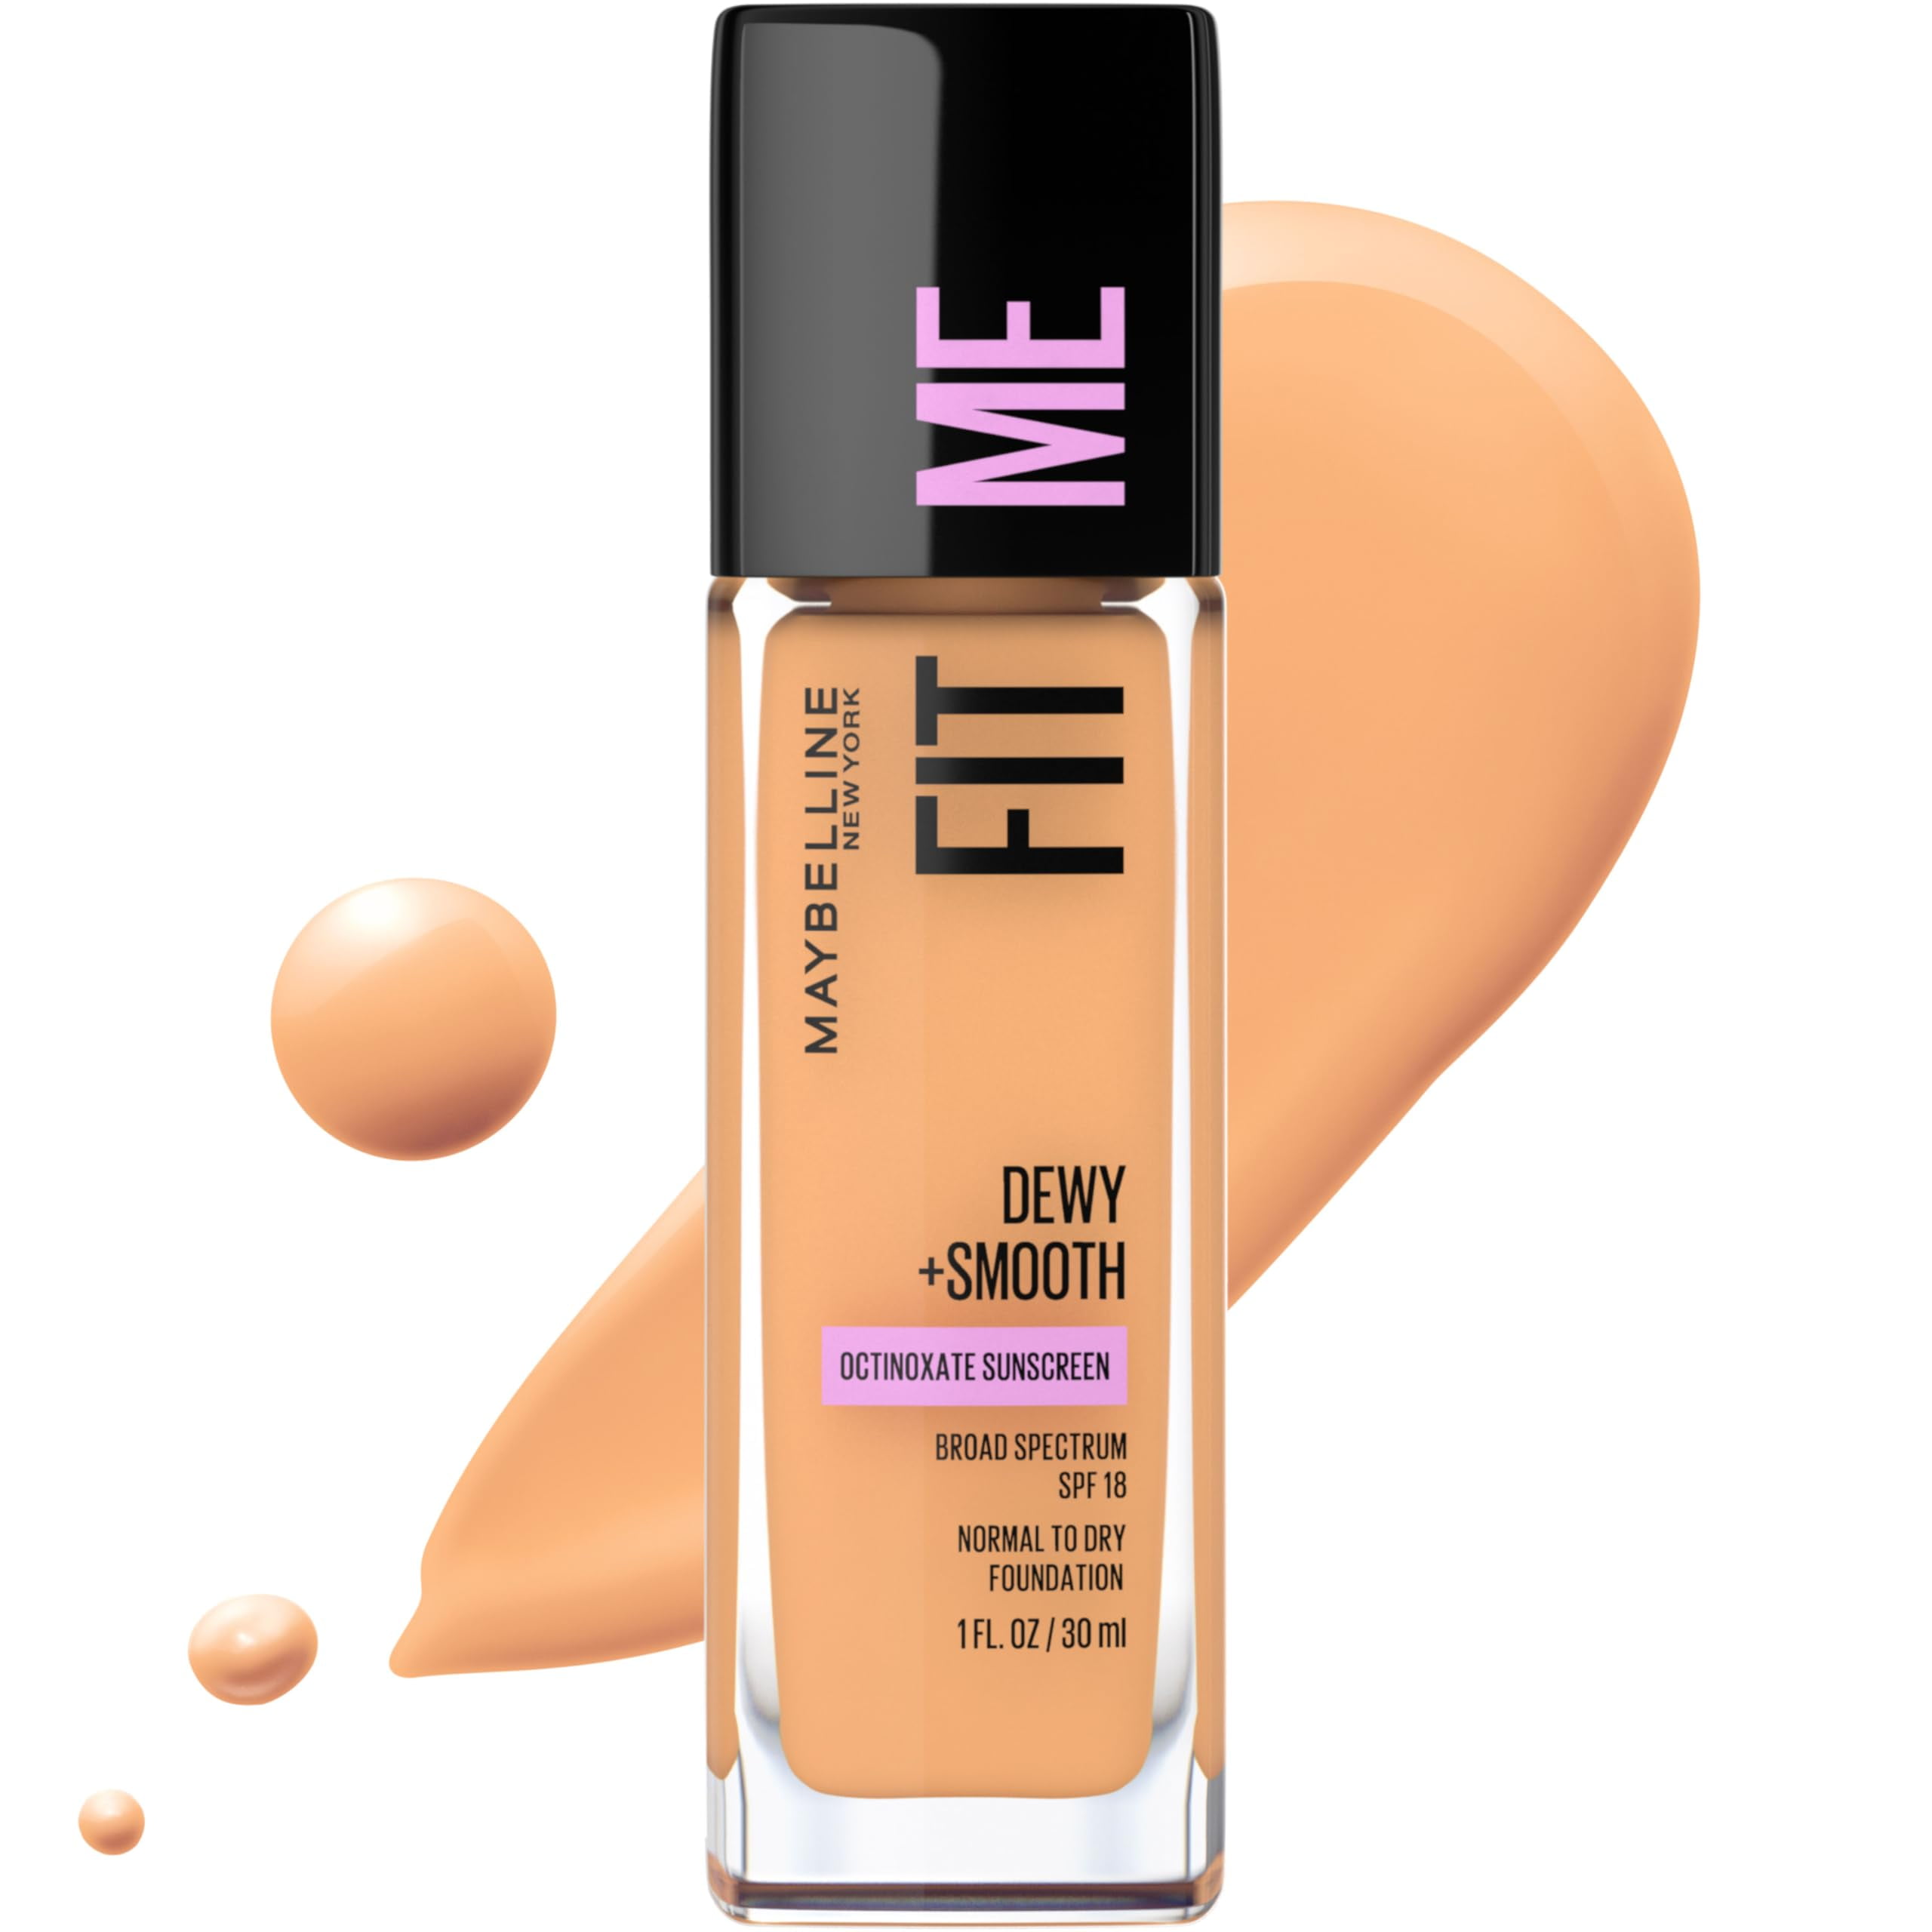 Get Radiant and Flawless Skin: Maybelline Fit Me Dewy + Smooth